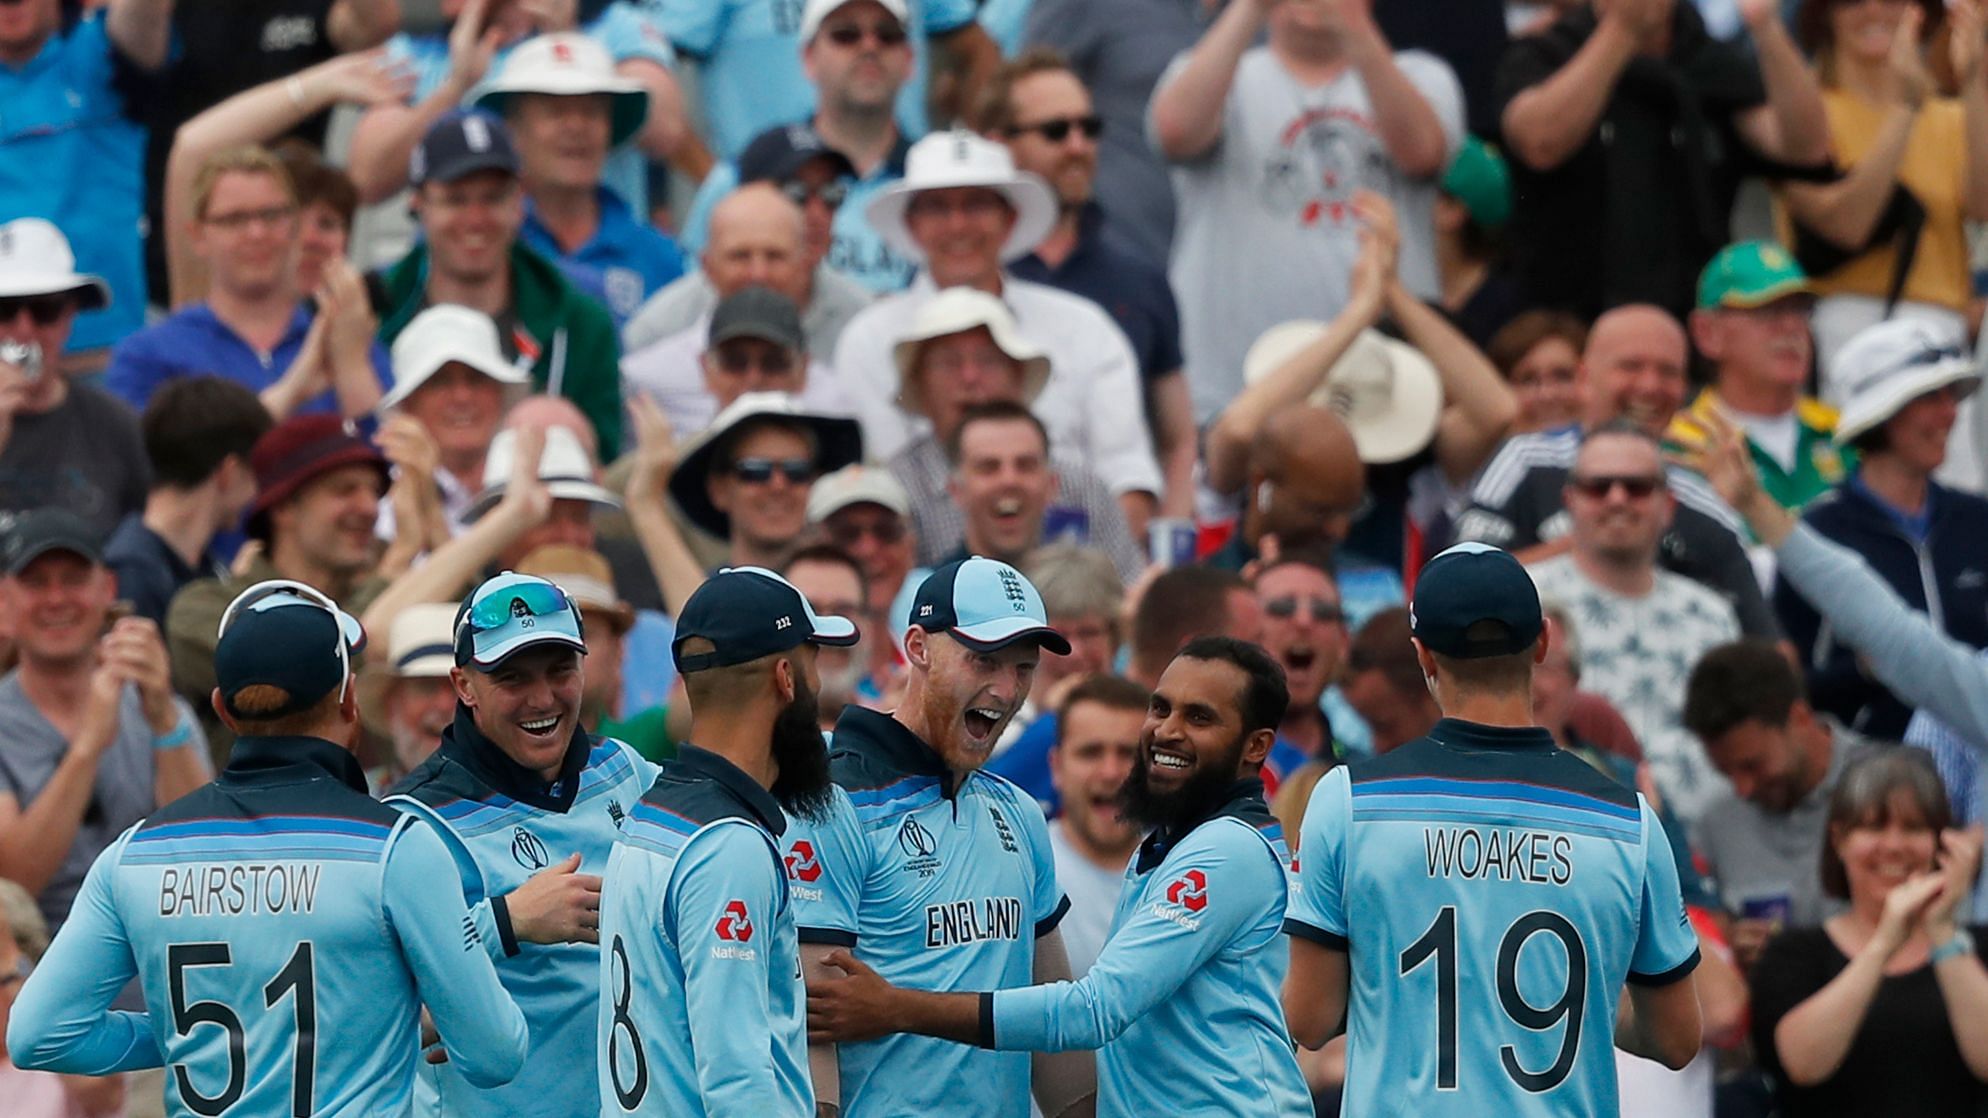 Watch video highlights of England’s 104-run victory over South Africa in the 2019 ICC World Cup tournament opener.